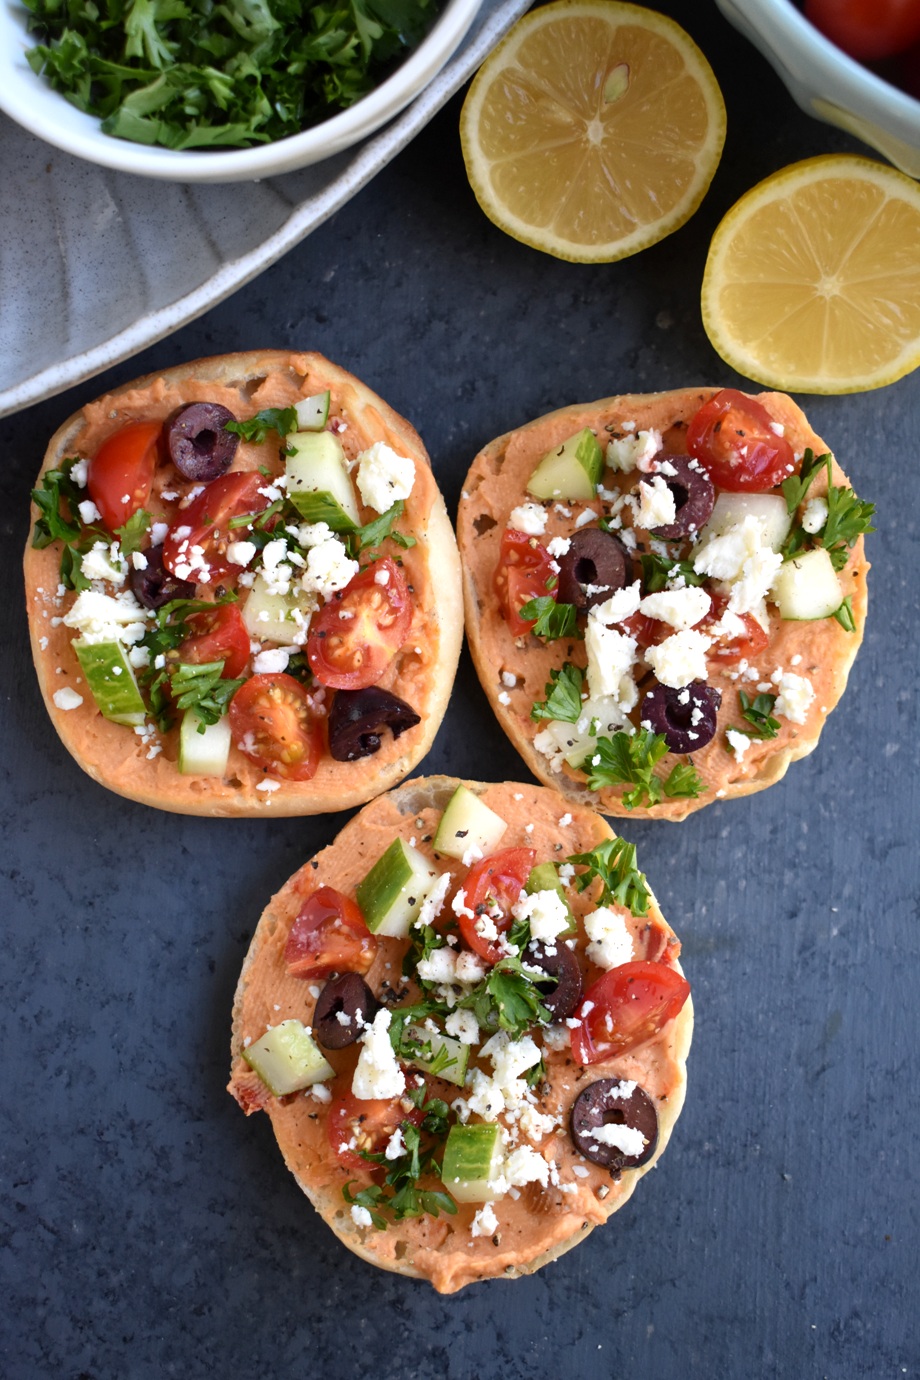 Mediterranean Hummus Bites are loaded with red pepper hummus, kalamata olives, tomatoes, cucumber and feta cheese on a toasted English muffin for an easy appetizer ready in 10 minutes that everyone will love! www.nutritionistreviews.com #healthy #appetizer #cleaneating #holidays